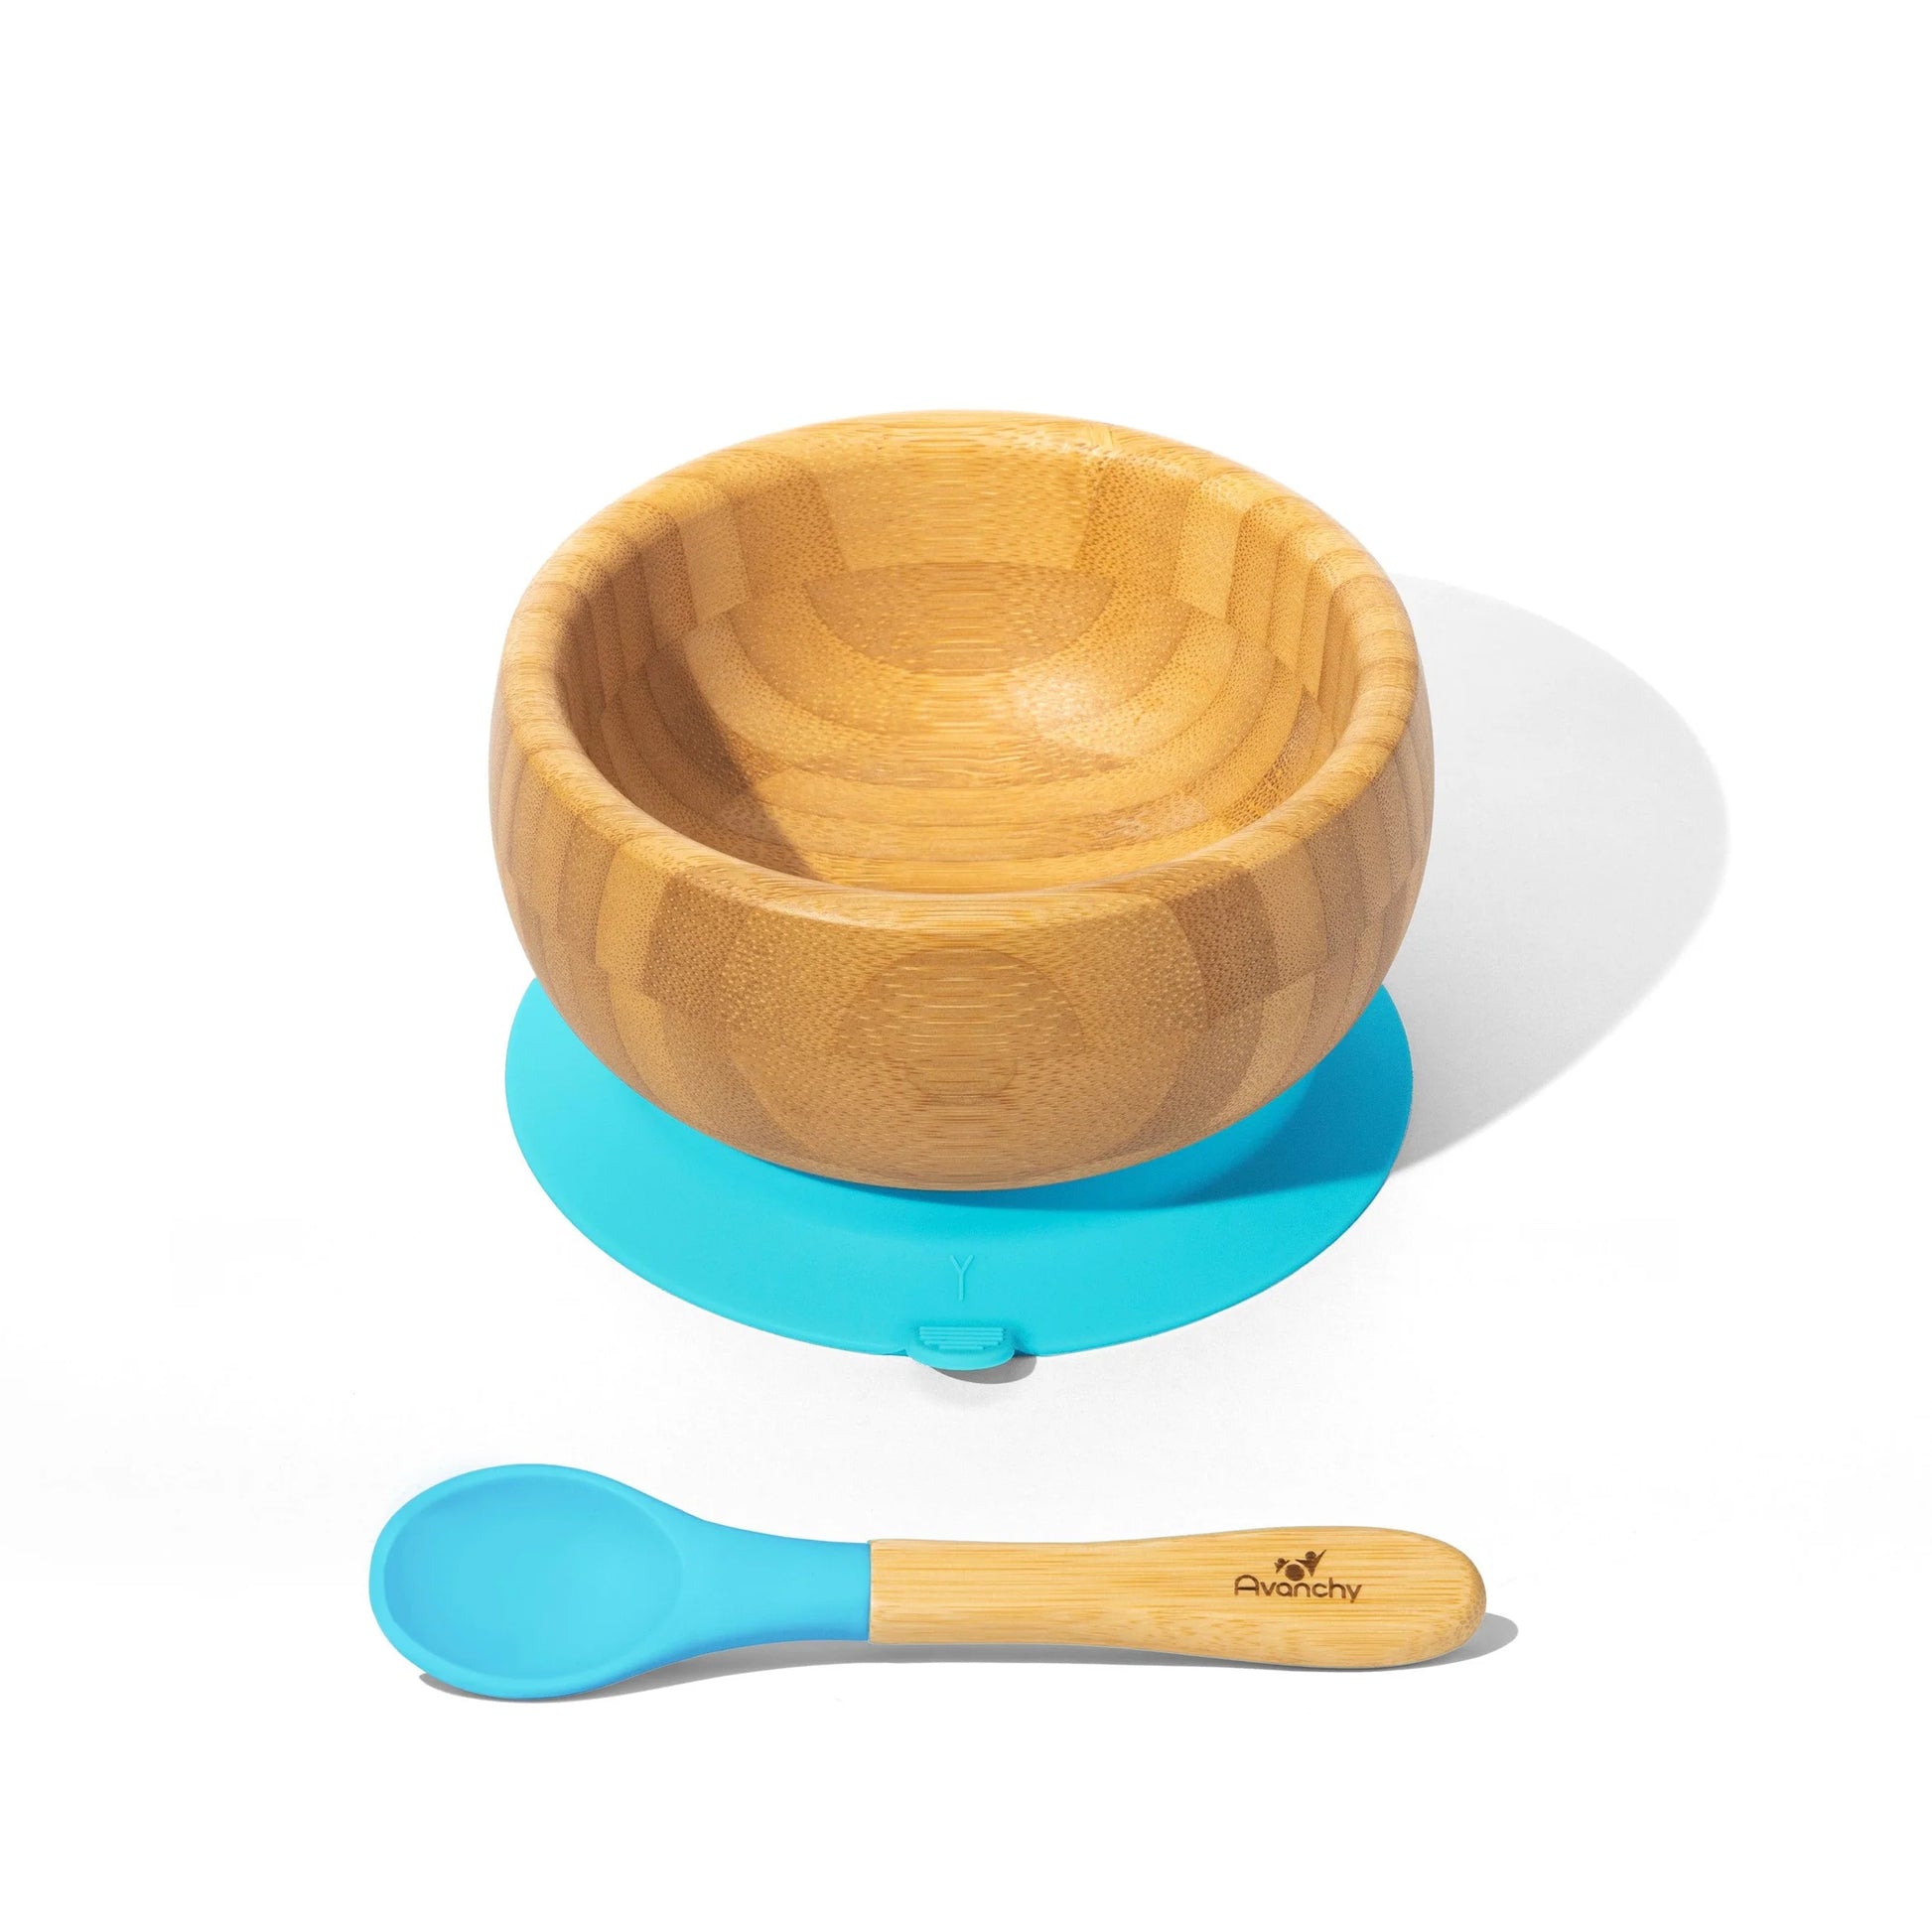 Avanchy - Baby Bamboo Stay Put Suction BOWL + Spoon BL